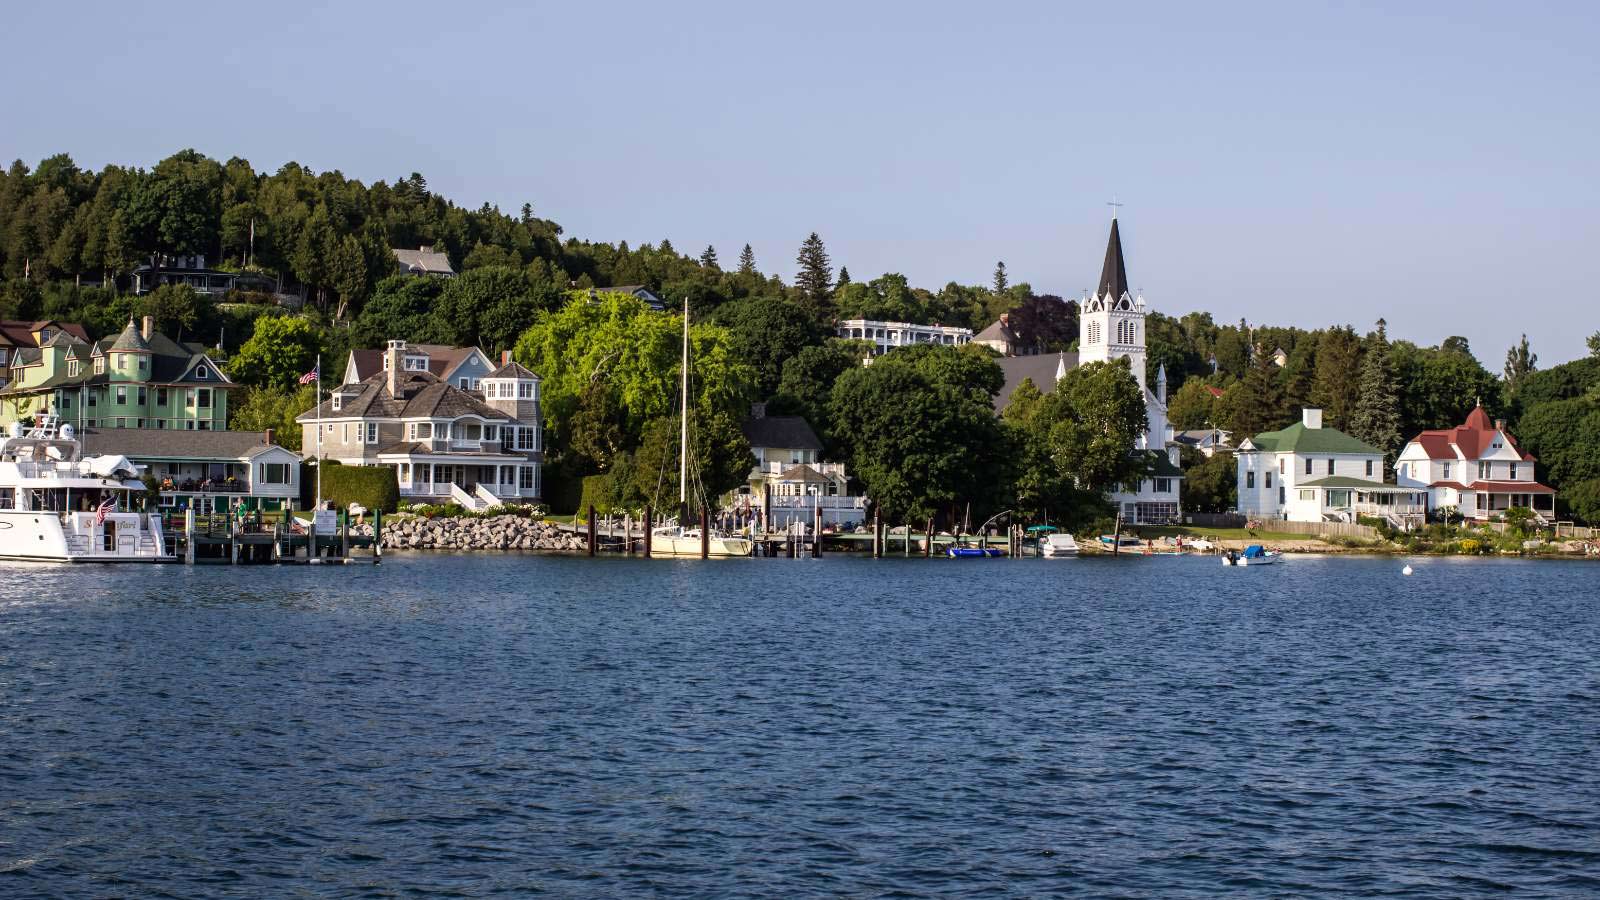 <p>Mackinac Island is a summer resort island in Lake Huron, located right between the upper peninsula and lower peninsula of Michigan. This is a great place to visit in the summer. Winters can be sketchy at best, it gets pretty cold there.</p>